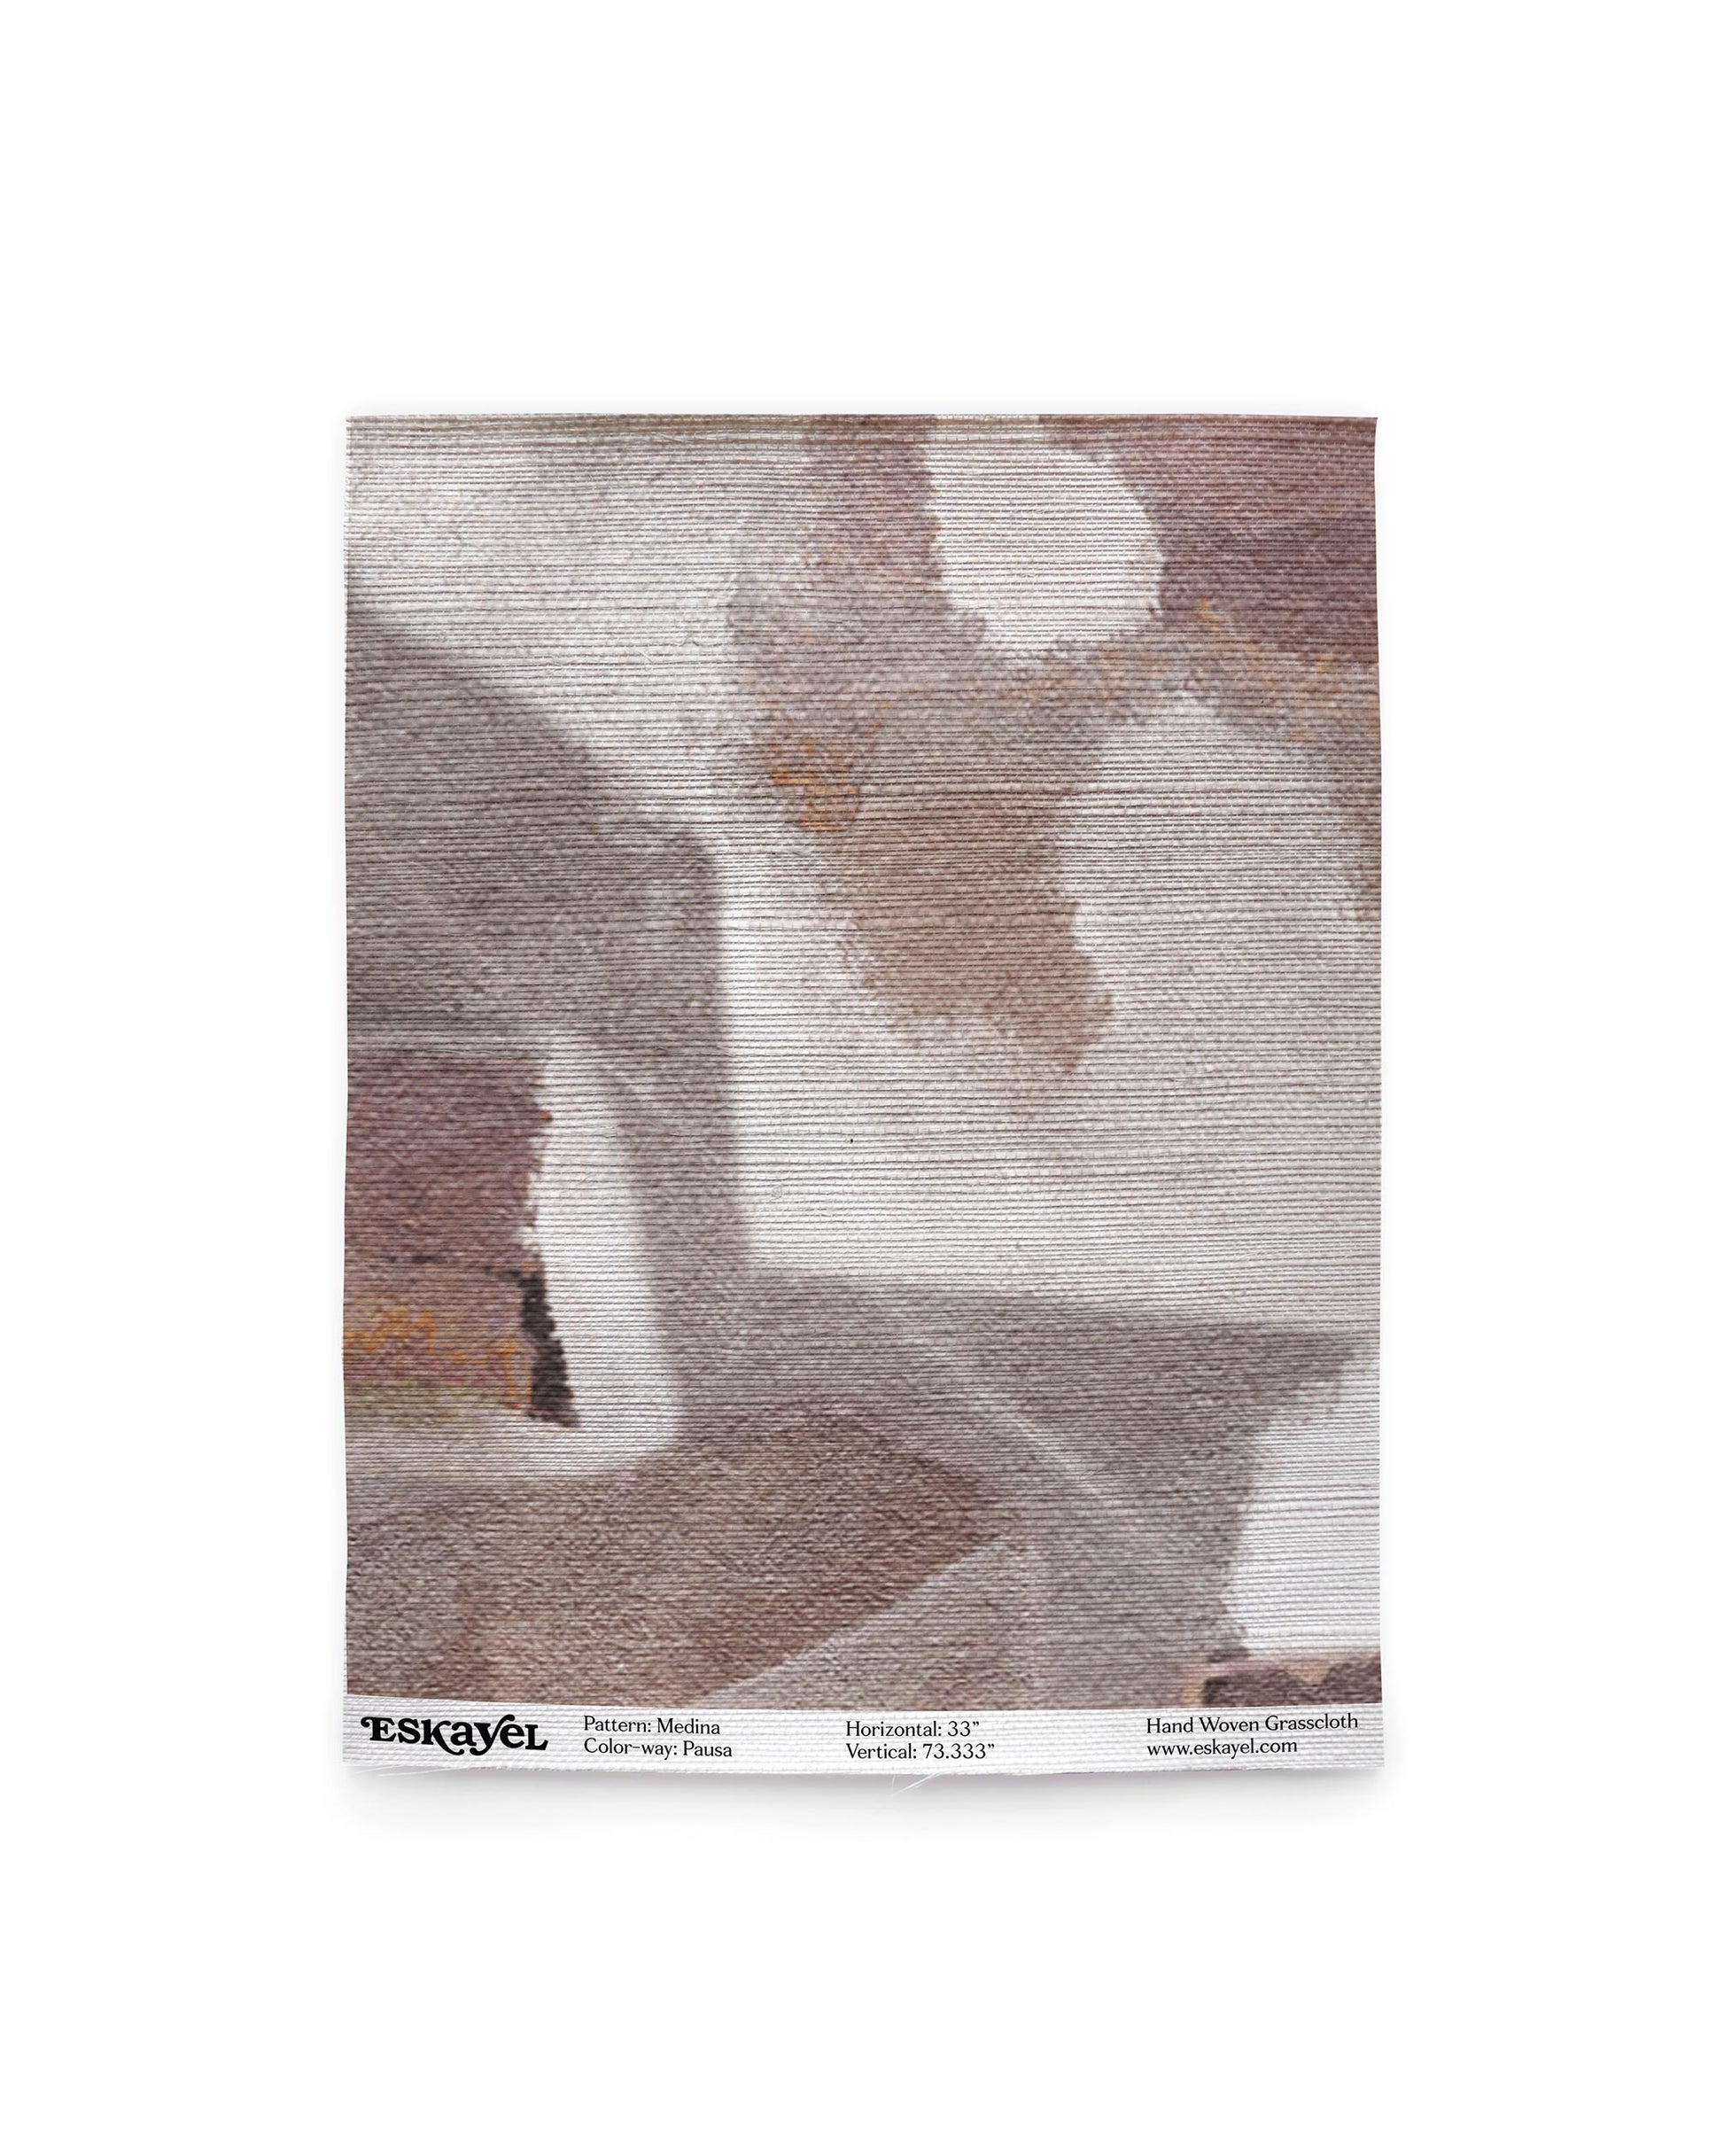 A brown and white Medina Grasscloth Sample Pausa on wallpaper